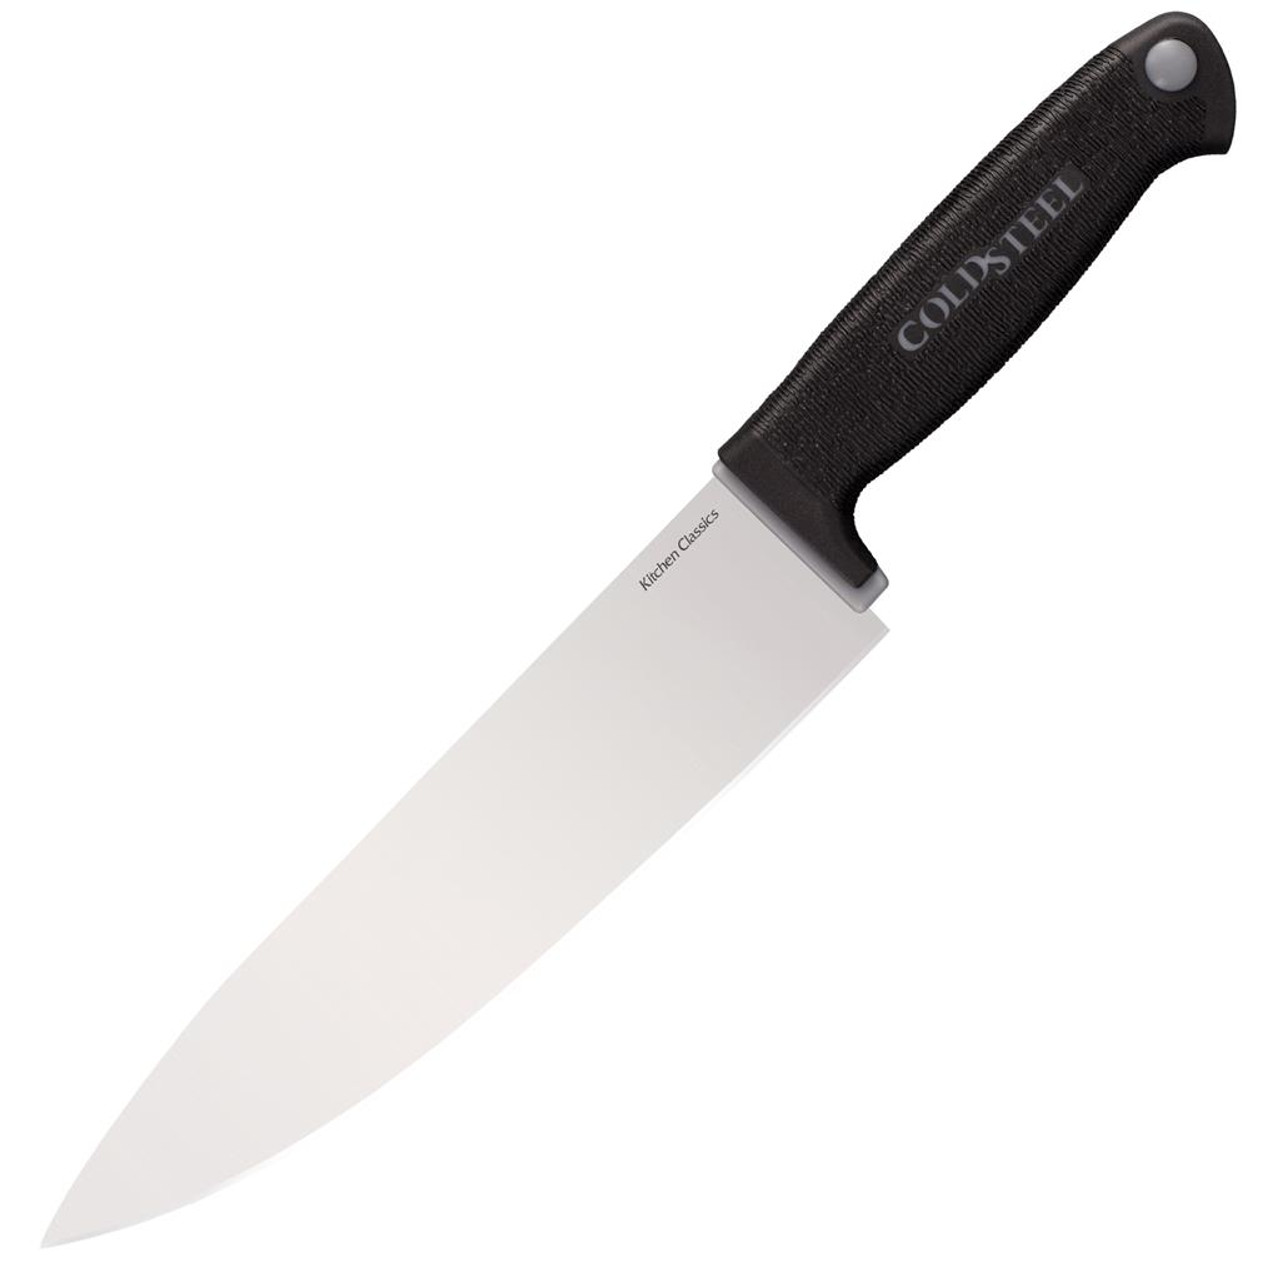 6-Inch vs. 8-Inch Chef's Knife (Which Size Is Better?) - Prudent Reviews